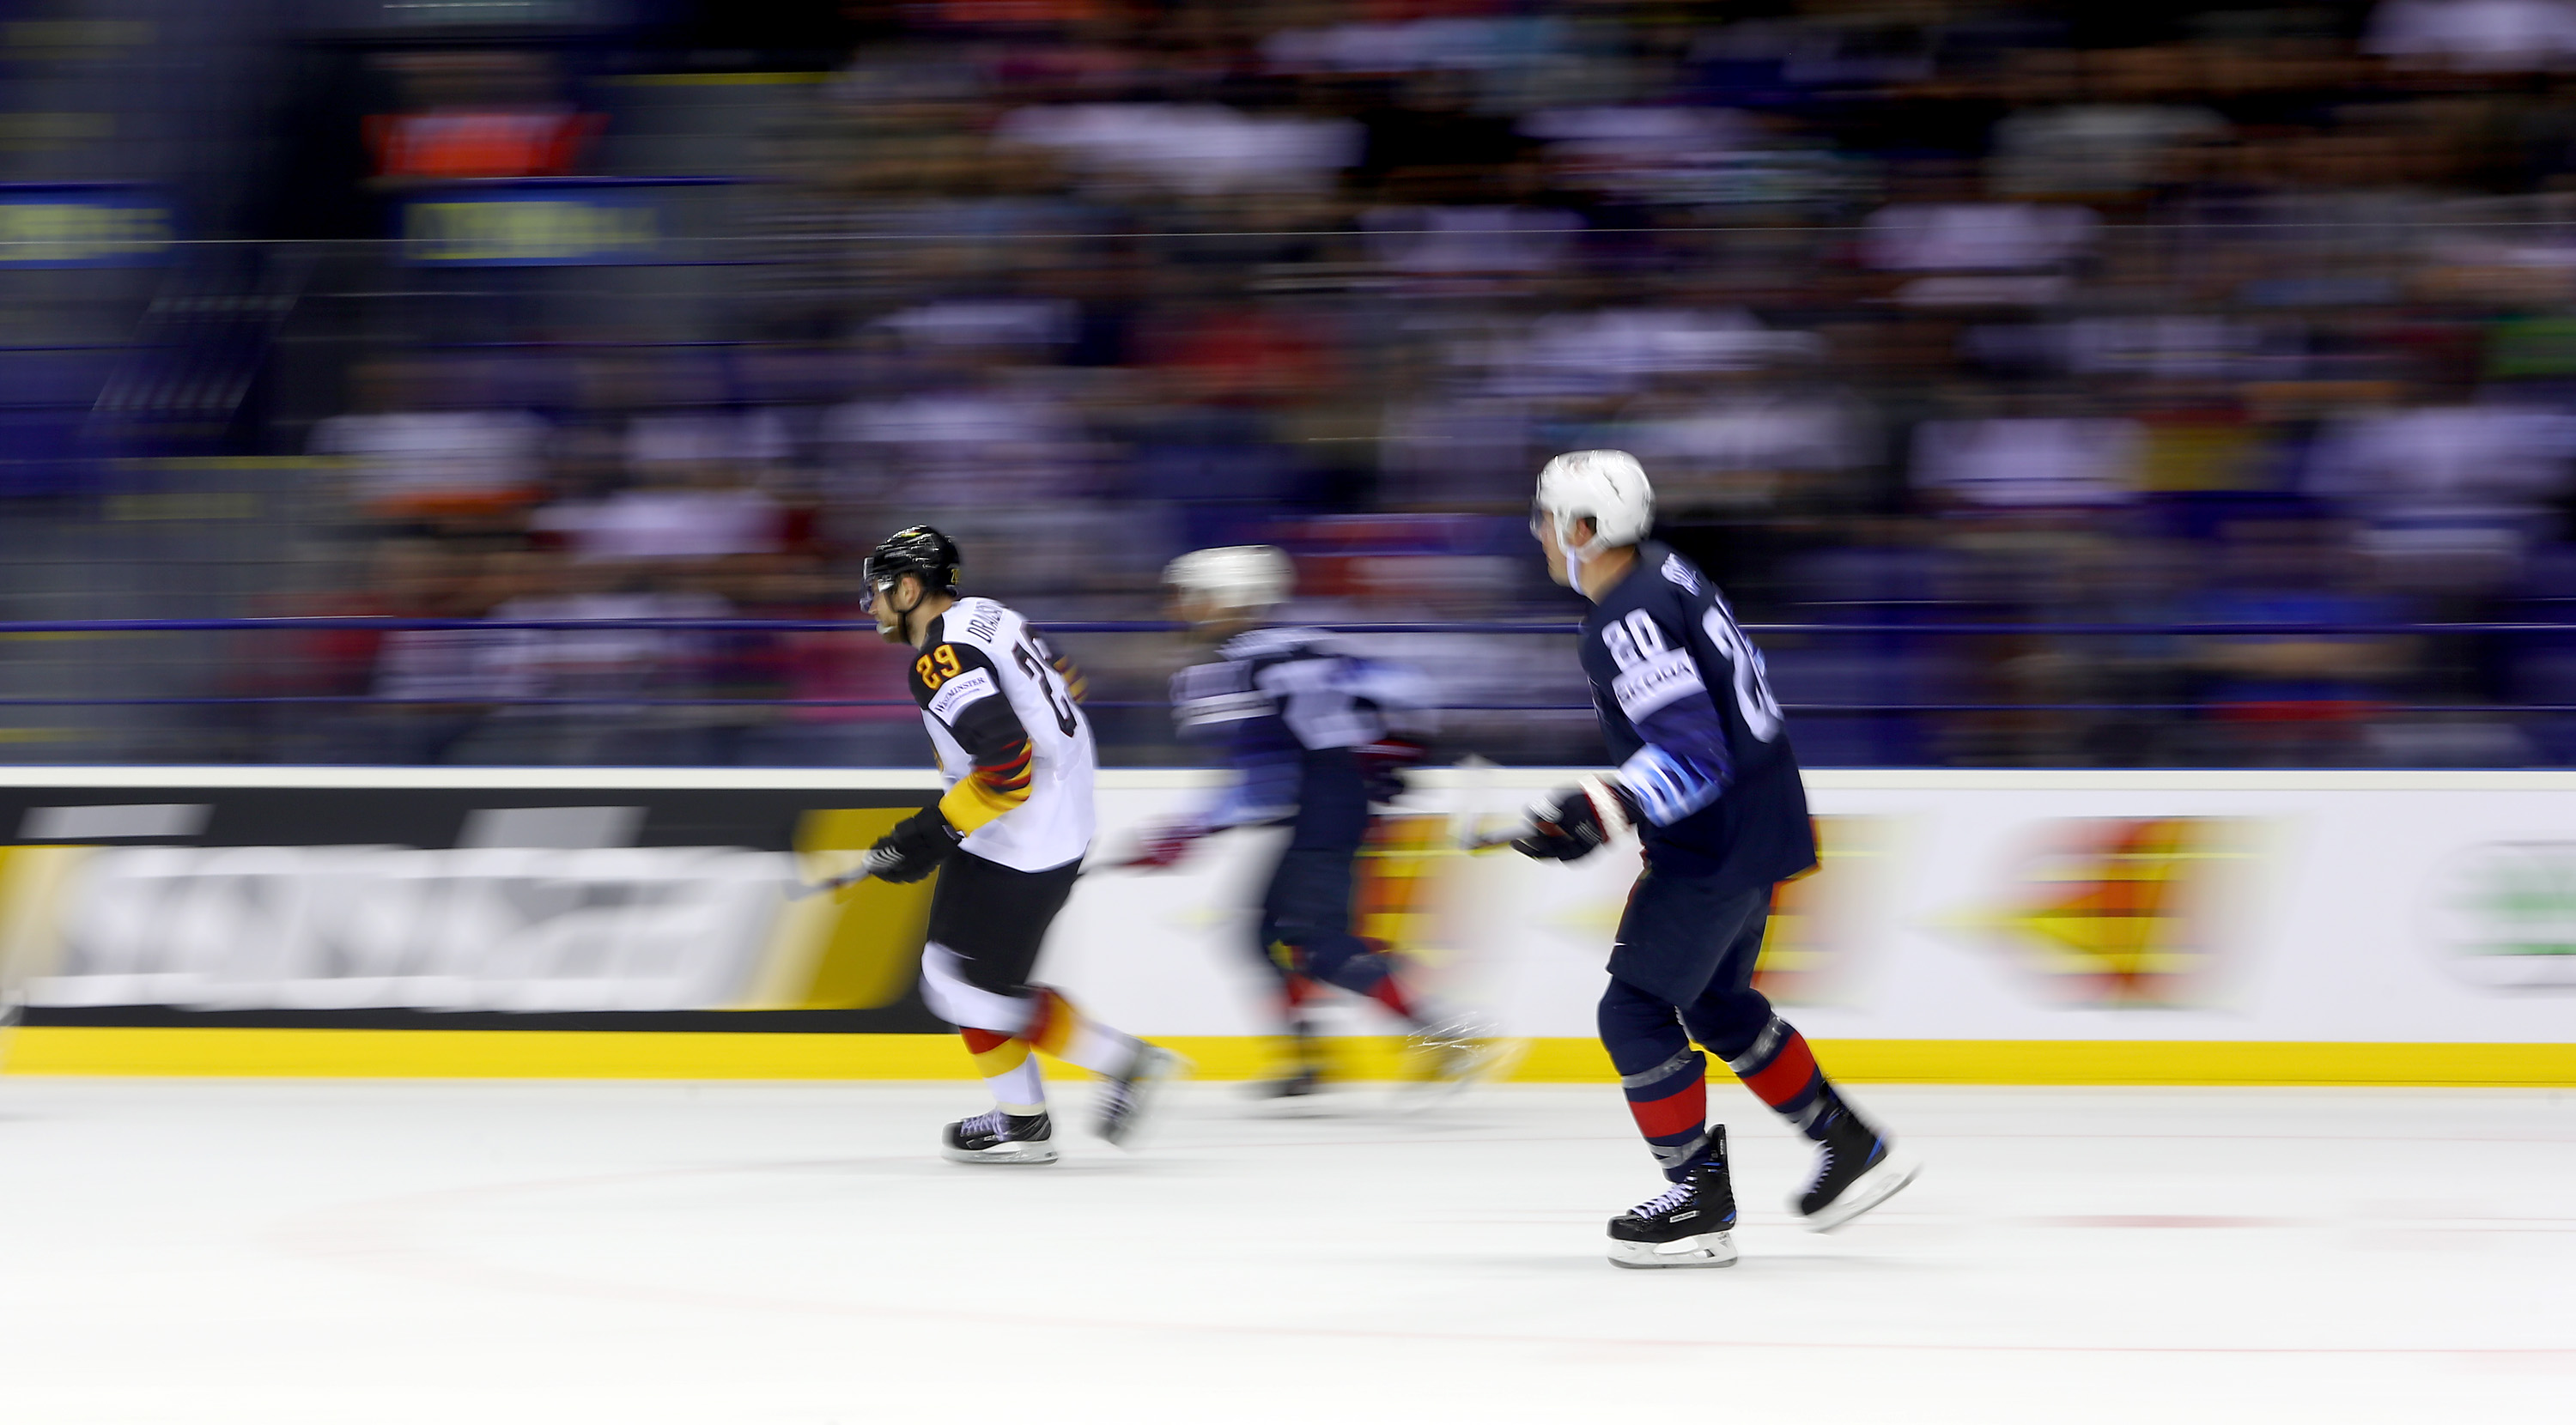 Leon Draisaitl of Germany skates against United States during the 2019 IIHF Ice Hockey World Championship Slovakia group A game between Germany and United States at Steel Arena on May 19, 2019 in Kosice, Slovakia.